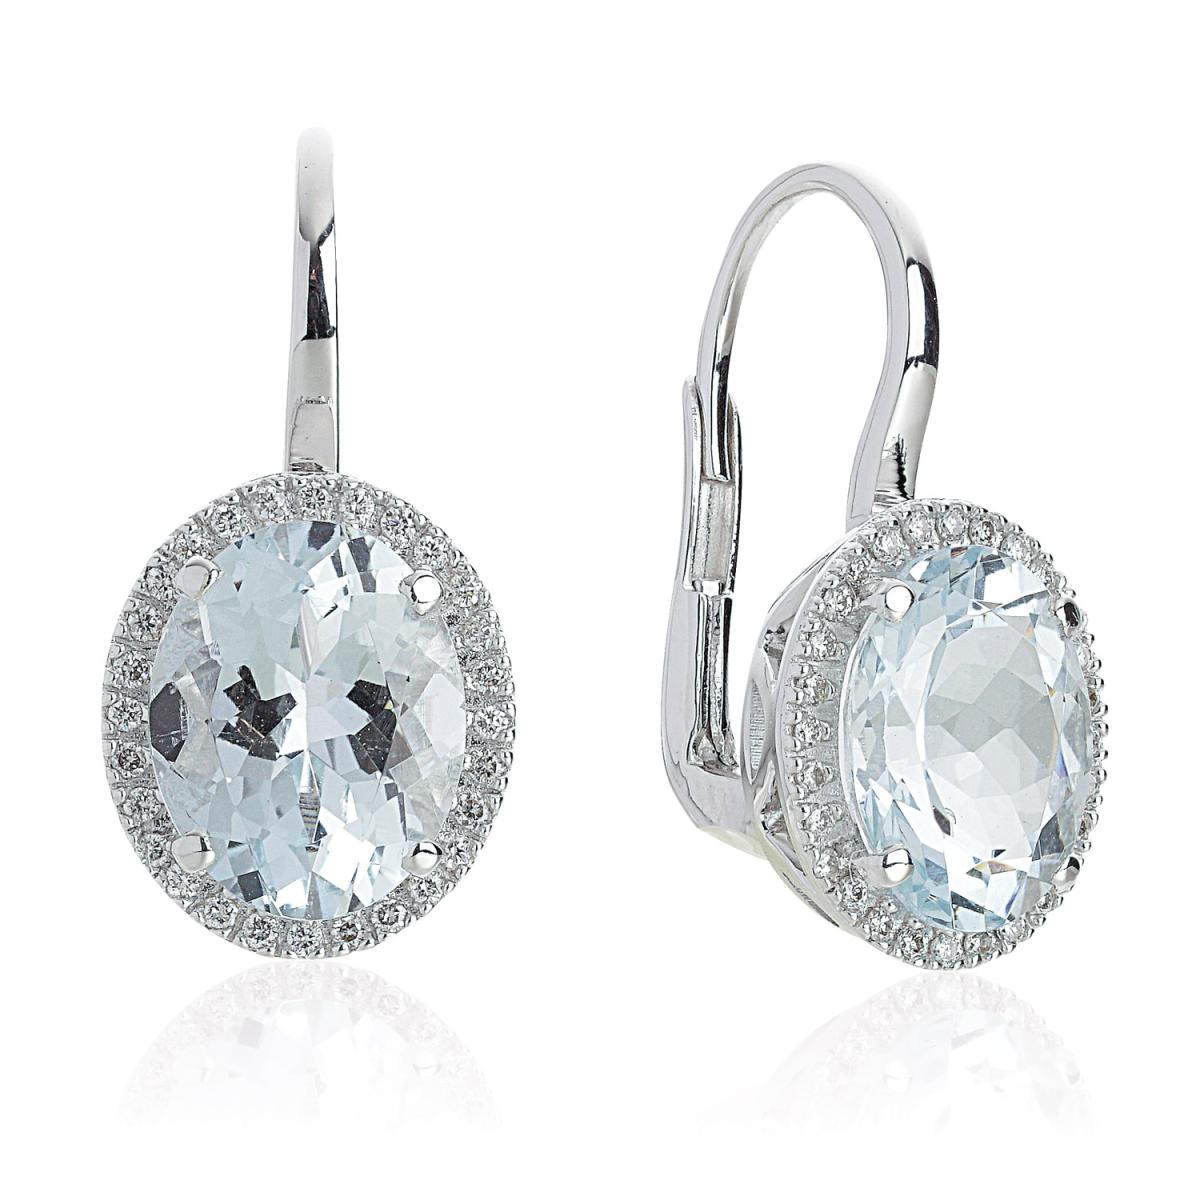 18 kt white gold earrings, leverback with aquamarine and diamonds - OD393/AC-LB